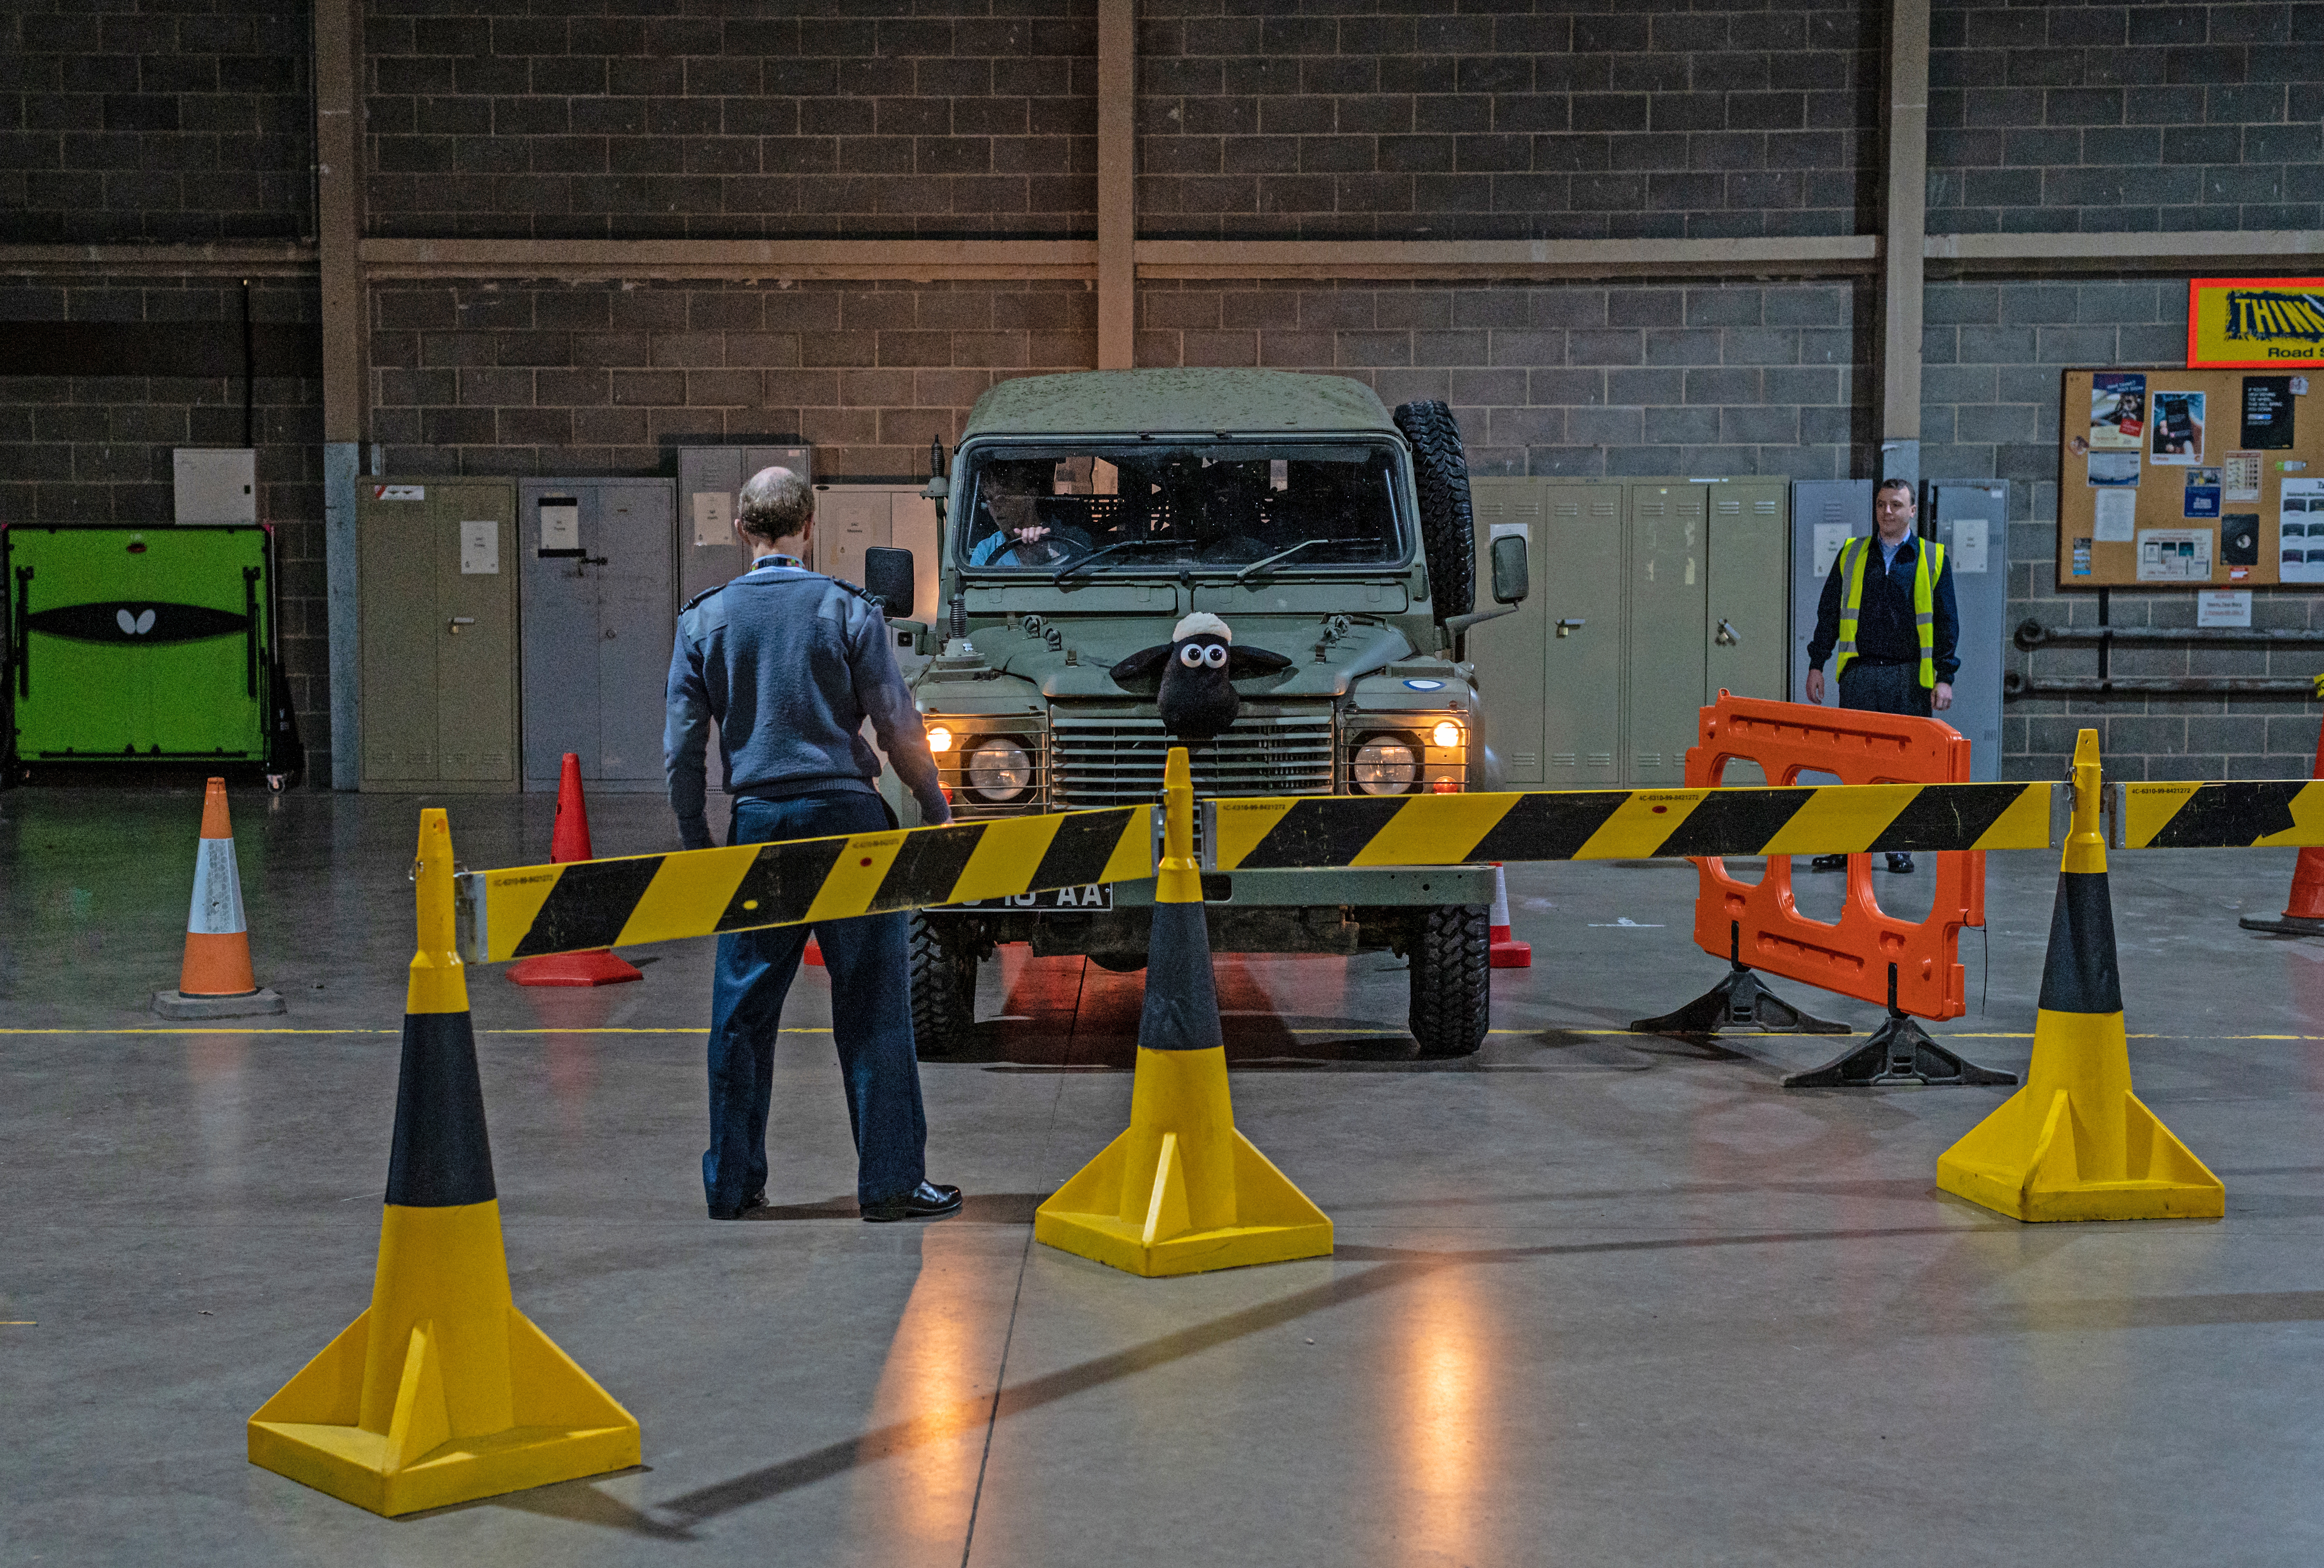 Driving Proficiency Test as part of Road Safety Week